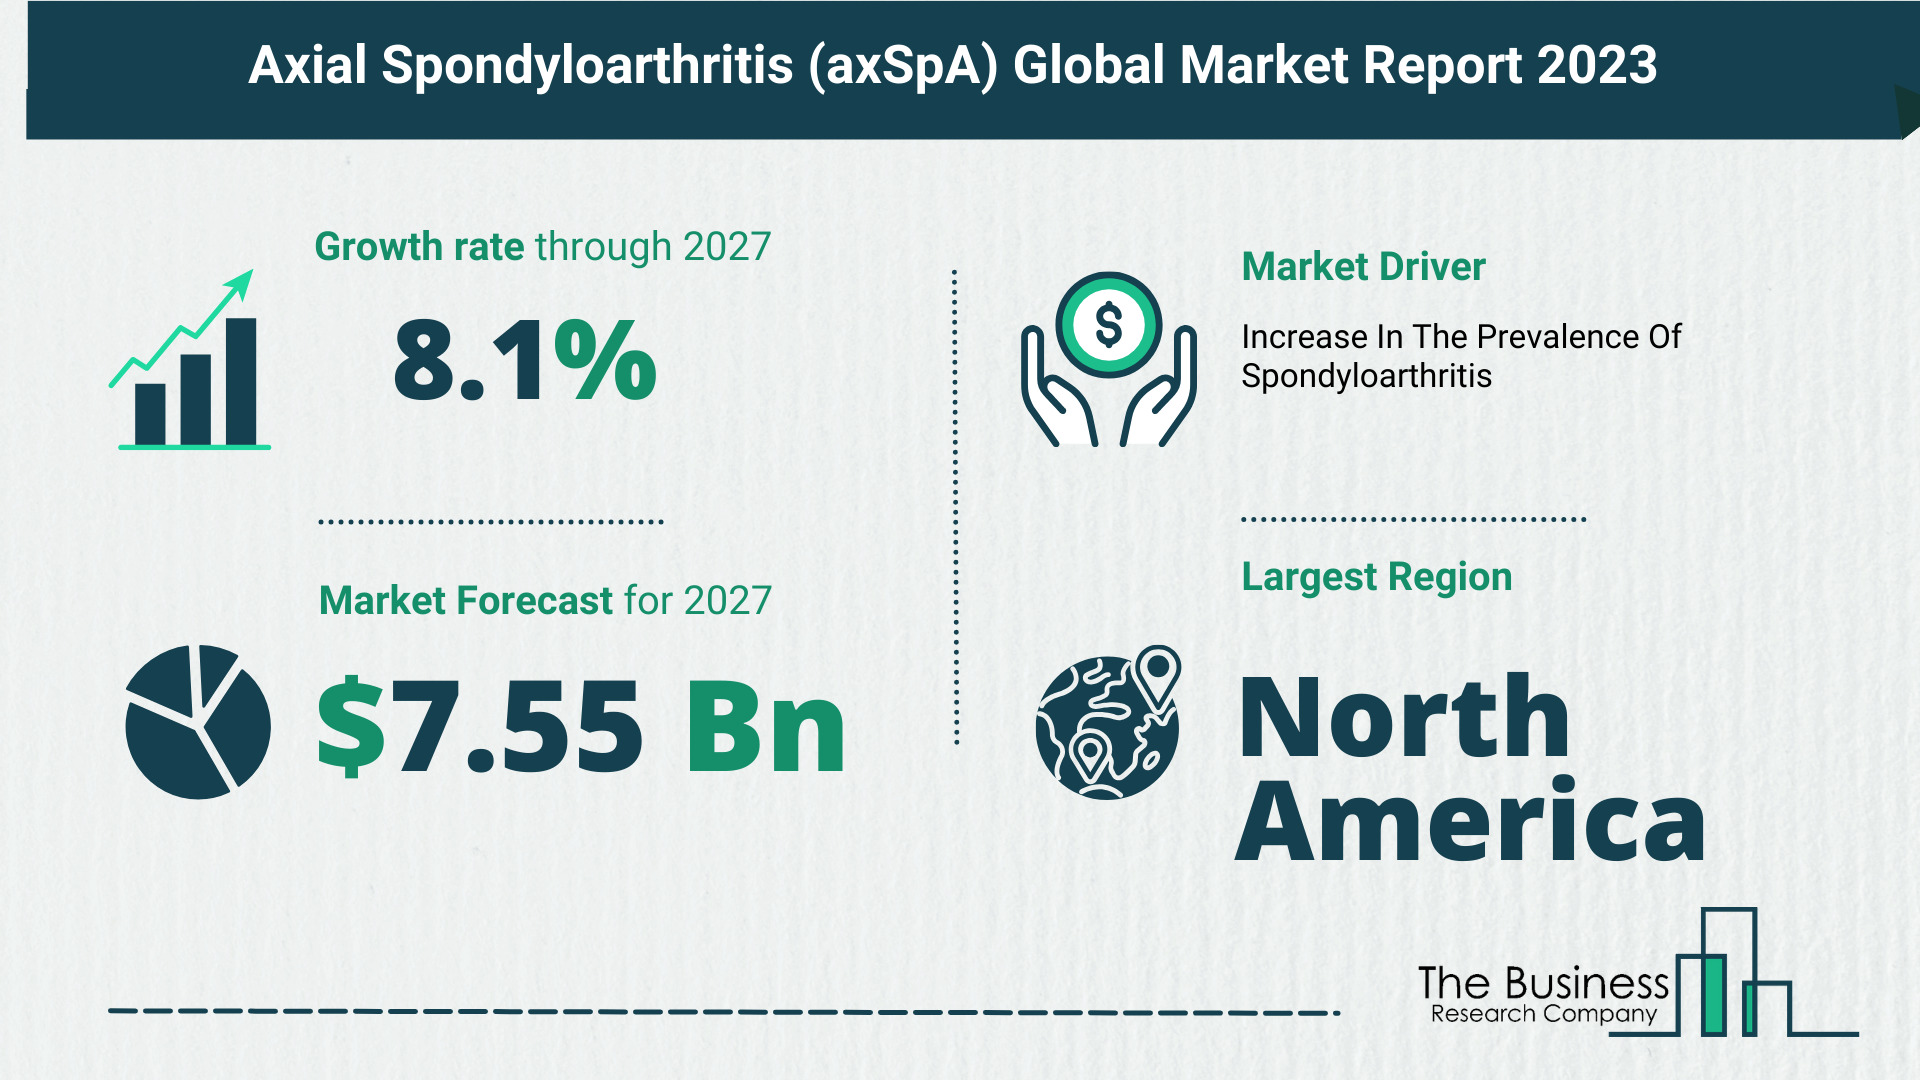 Global Axial Spondyloarthritis Market Analysis: Estimated Market Size And Growth Rate